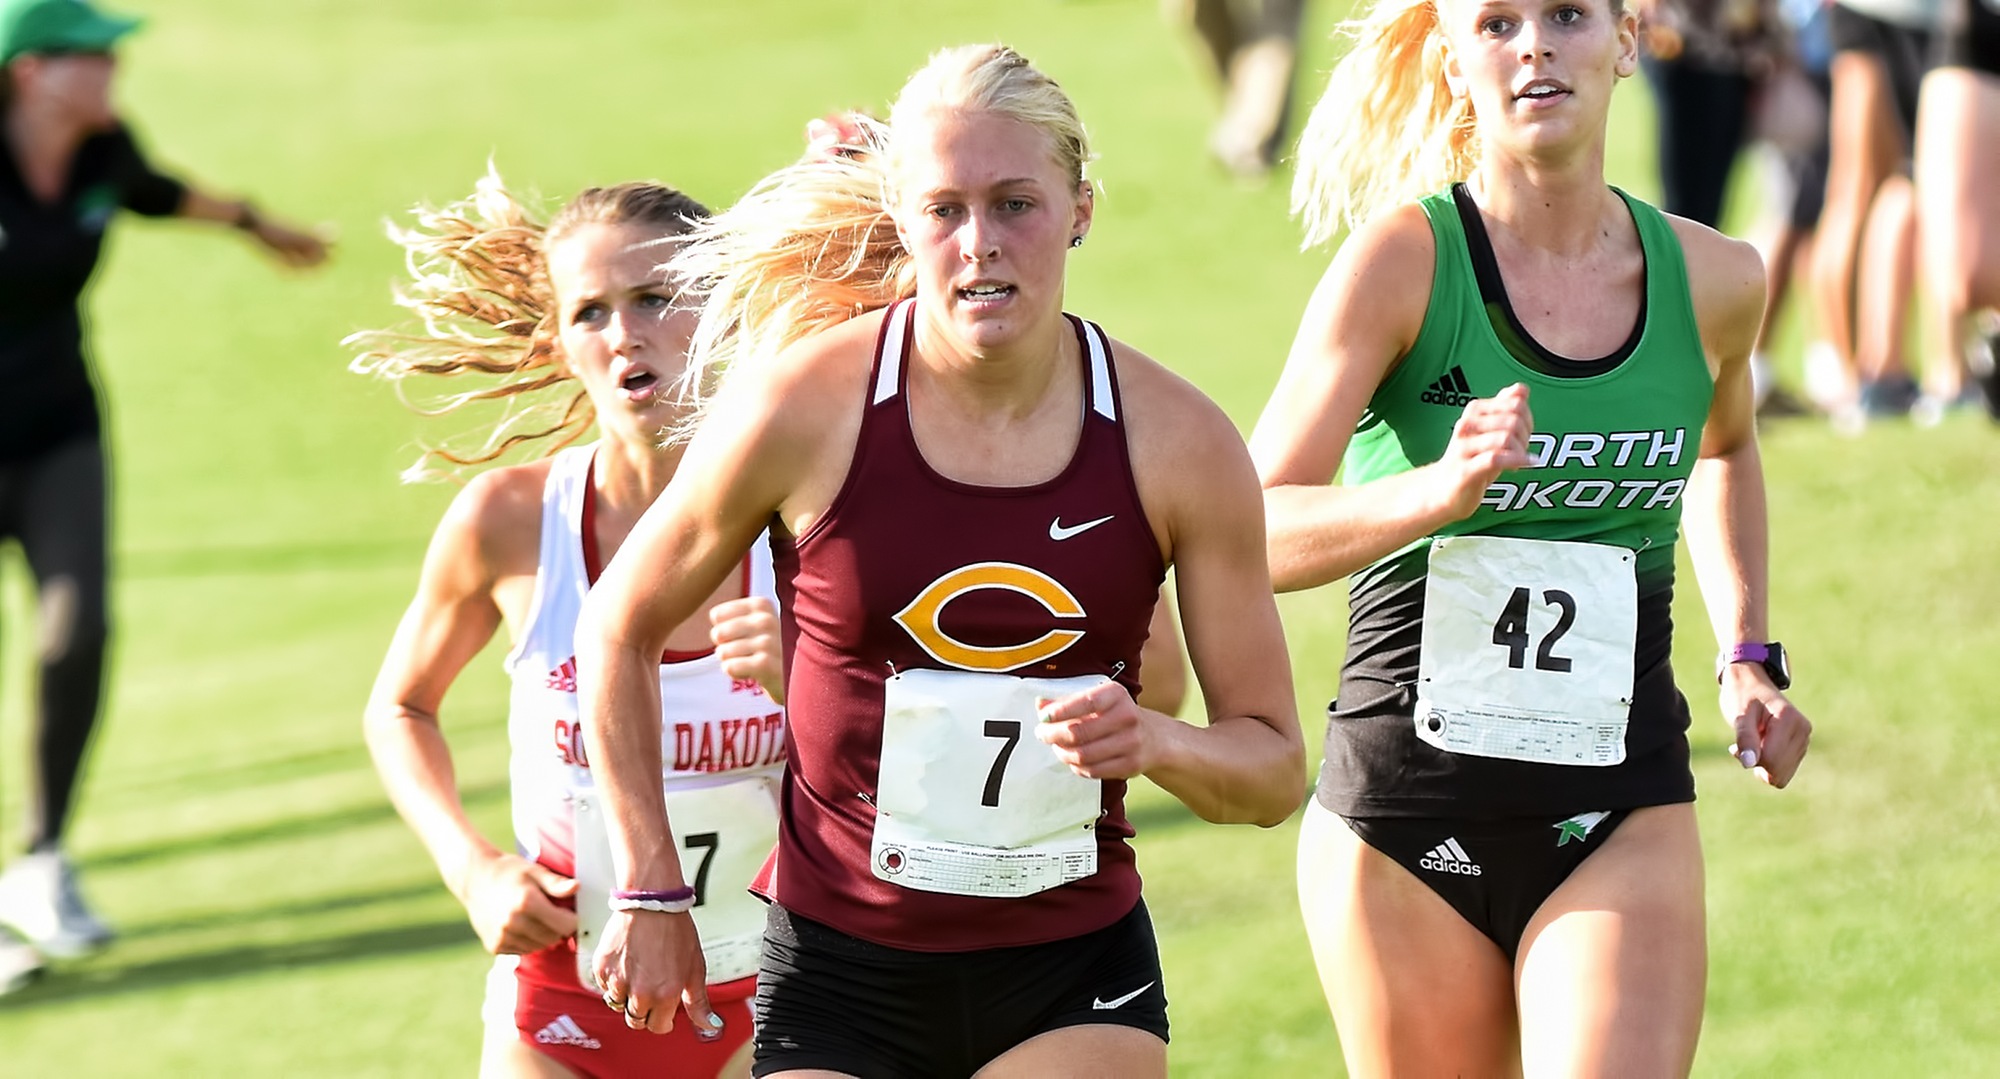 Senior Miriah Forness led Concordia for the first time in her career and she was one of three Top 25 finishers for the Cobbers at the Carleton Invite.